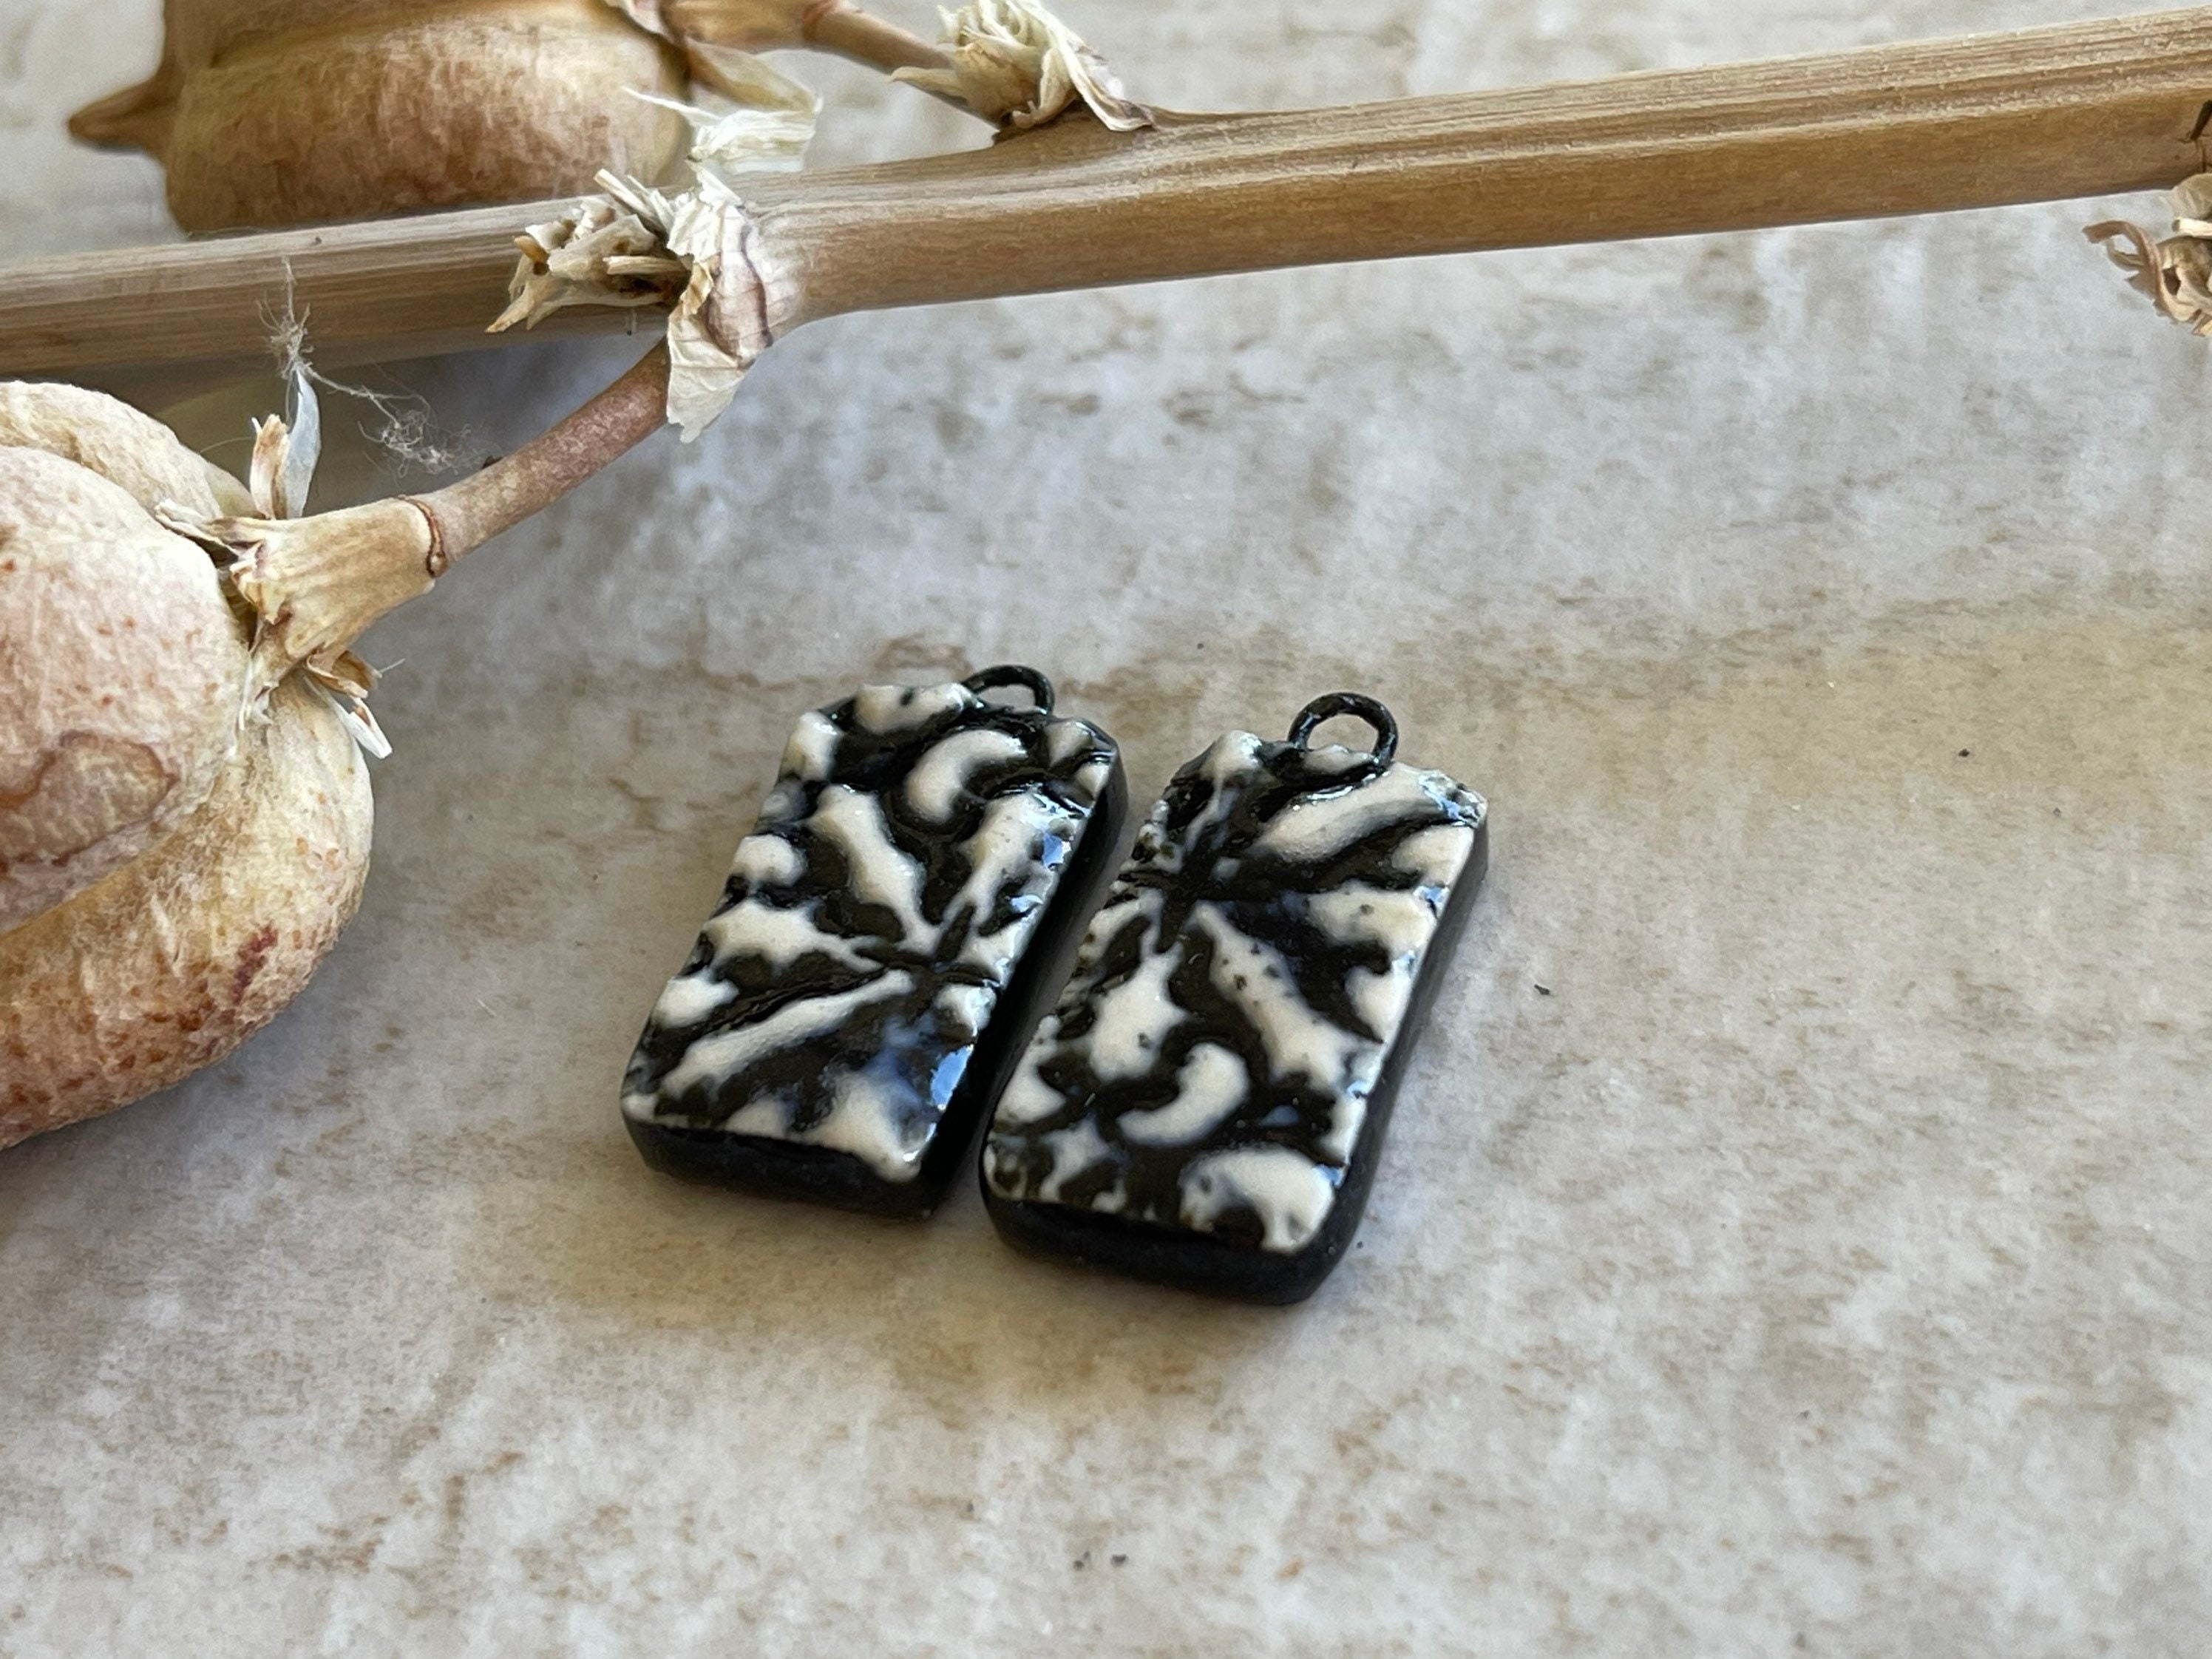 Italian Tuscan, Black and White Earring Beads, Porcelain Beads, Floral Earring Bead Pair, Ceramic Charms, Jewelry Making Components